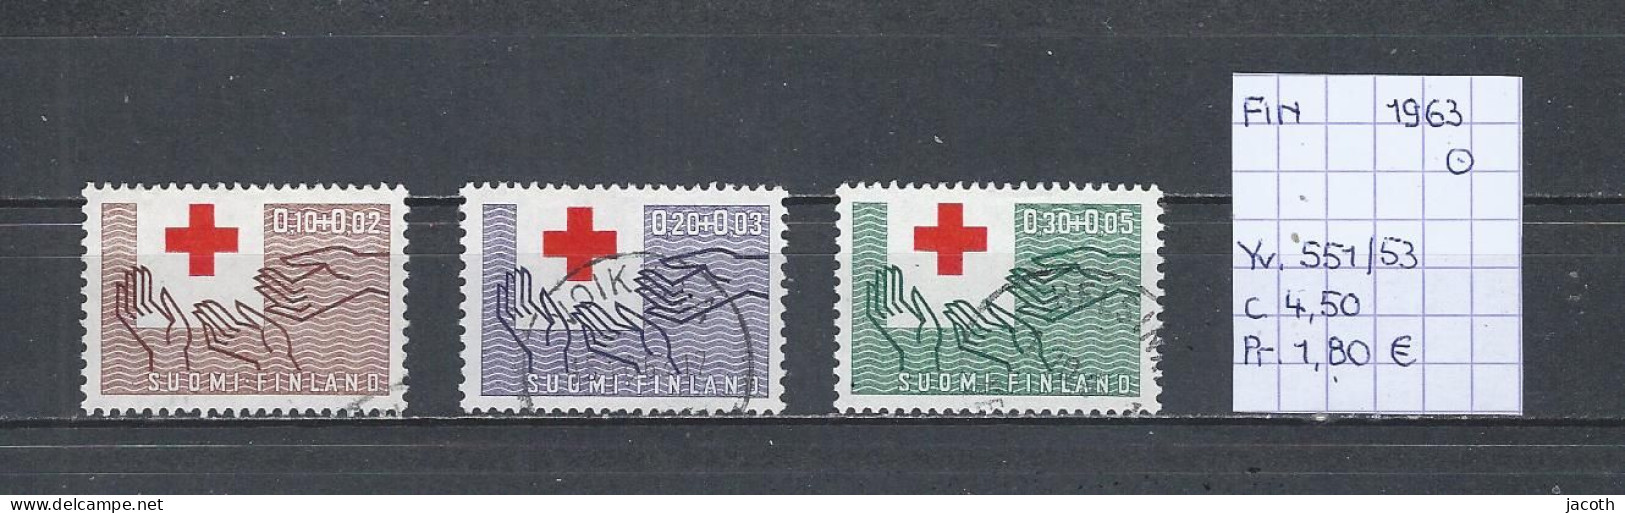 (TJ) Finland 1963 - YT 551/53 (gest./obl./used) - Used Stamps